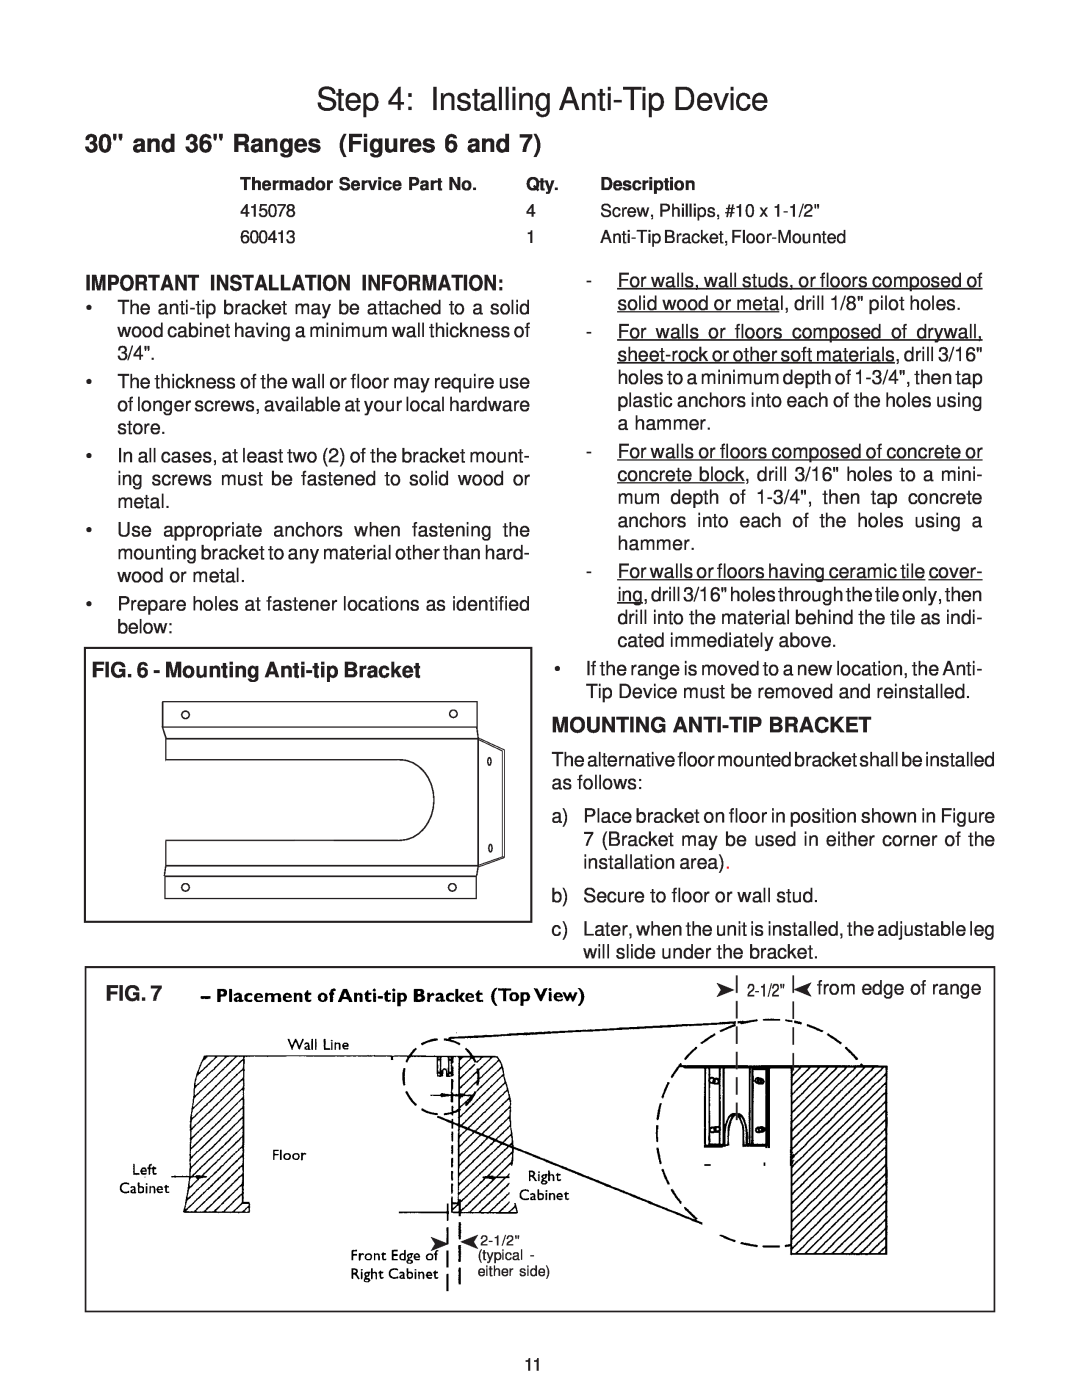 Thermador P30 and 36 Ranges Figures 6 and, Important Installation Information, Mounting Anti-tipBracket 